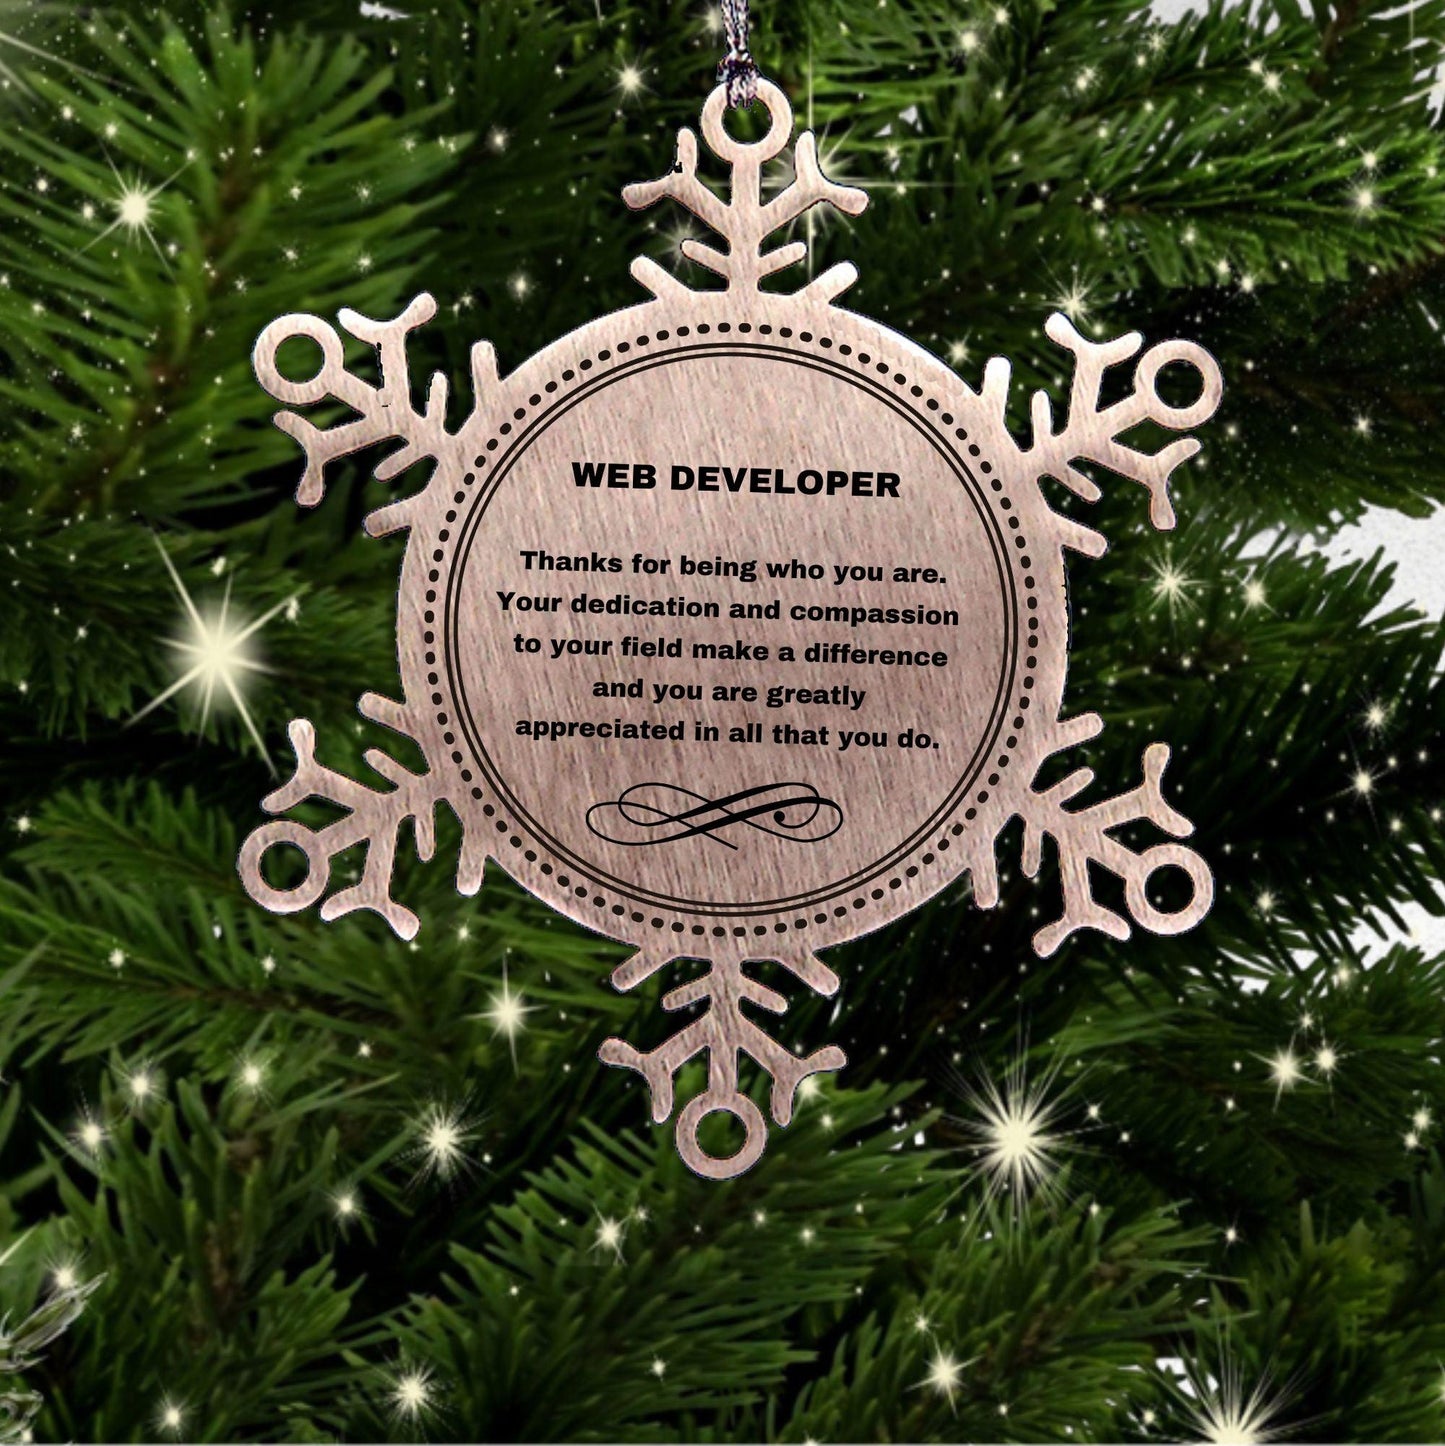 Web Developer Snowflake Ornament - Thanks for being who you are - Birthday Christmas Jewelry Gifts Coworkers Colleague Boss - Mallard Moon Gift Shop